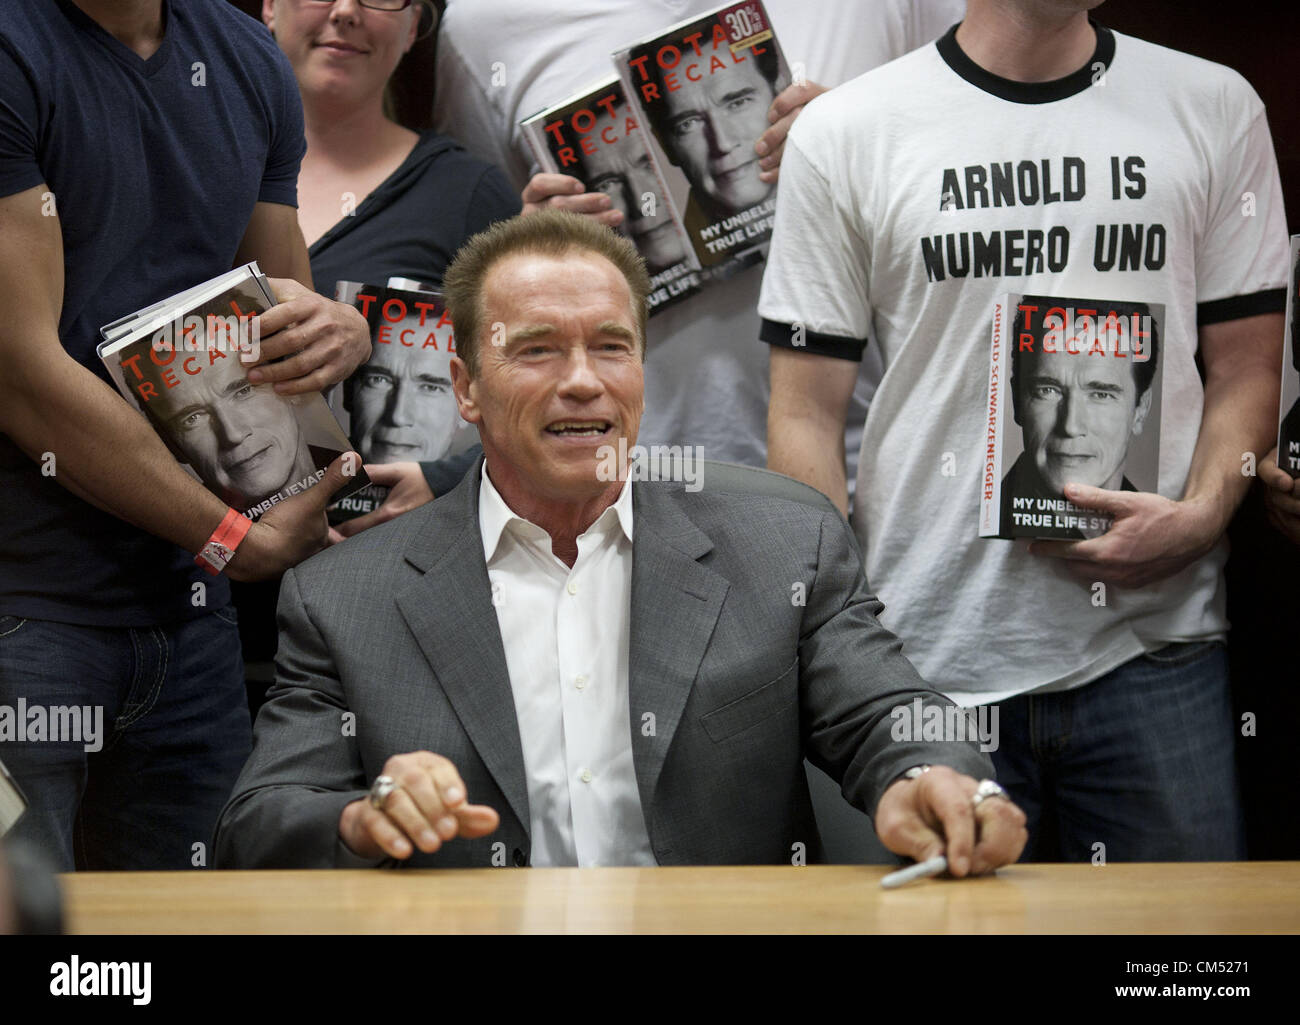 Oct. 5, 2012 - Los Angeles, CALIFORNIA, USA - Actor and former California Governor Arnold Schwarzenegger signs his memoir, 'Total Recall - My Unbelievably True Life Story', October 5, 2012 in Los Angeles, California.Schwarzenegger's book, 'Total Recall', named after one of his blockbuster movies, includes details of his marital infidelities, including fathering a child with his housekeeper, leading his wife Maria Shriver to file for divorce.ARMANDO ARORIZO (Credit Image: Credit:  Armando Arorizo/Prensa Internacional/ZUMAPRESS.com)/ Alamy Live News Stock Photo